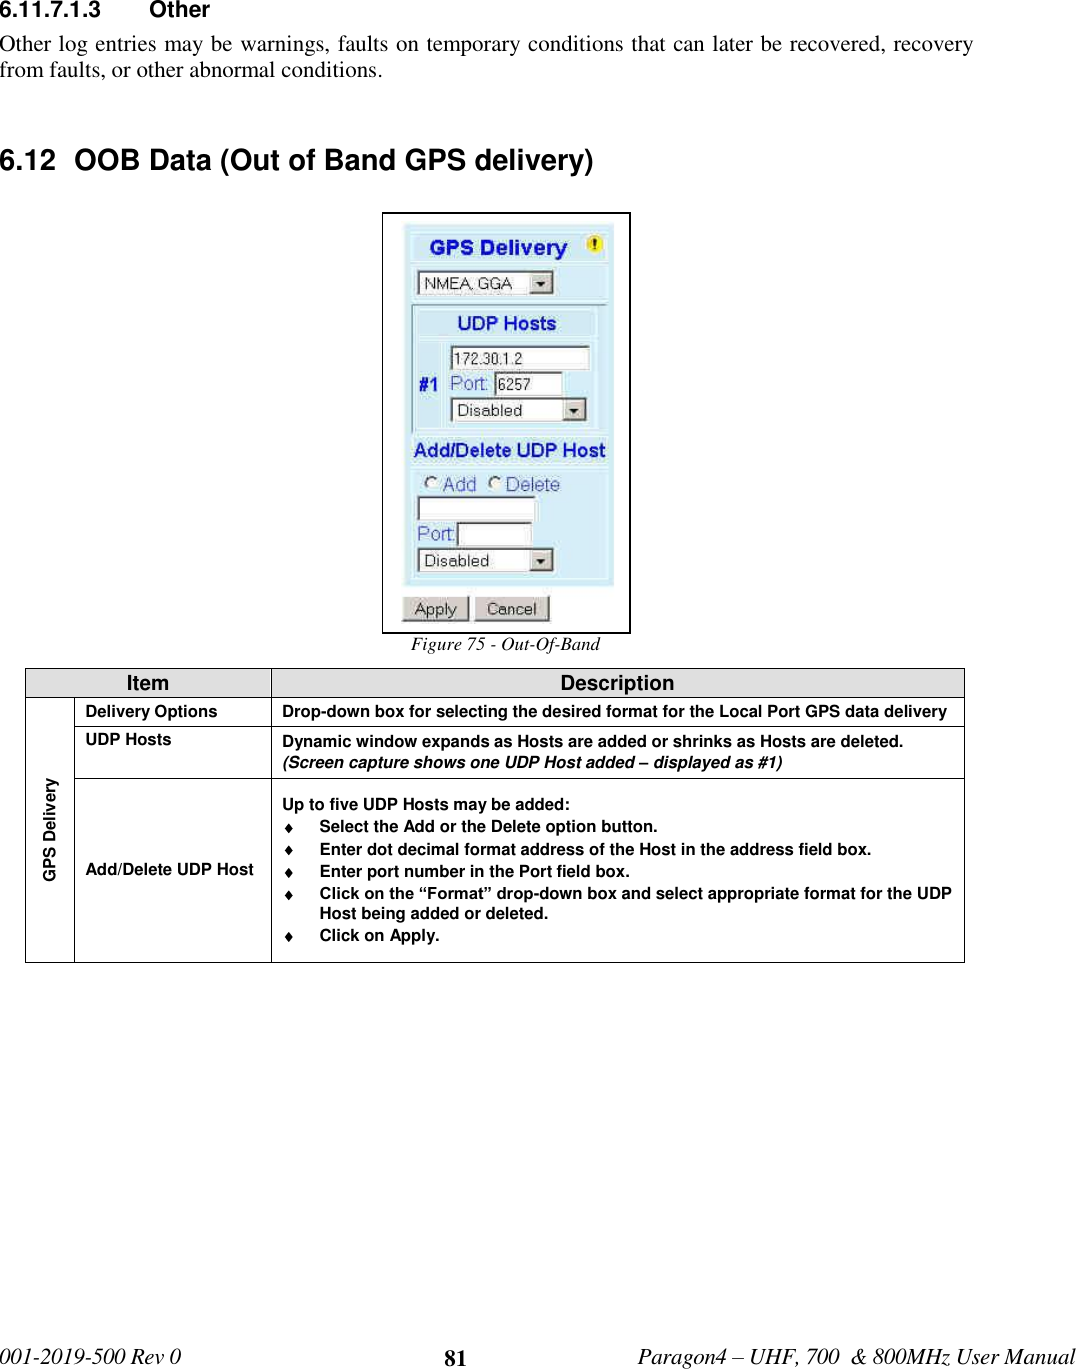   001-2019-500 Rev 0         Paragon4 – UHF, 700  &amp; 800MHz User Manual     81  6.11.7.1.3  Other Other log entries may be warnings, faults on temporary conditions that can later be recovered, recovery from faults, or other abnormal conditions.  6.12  OOB Data (Out of Band GPS delivery) Figure 75 - Out-Of-Band Item Description GPS Delivery Delivery Options Drop-down box for selecting the desired format for the Local Port GPS data delivery UDP Hosts   Dynamic window expands as Hosts are added or shrinks as Hosts are deleted. (Screen capture shows one UDP Host added – displayed as #1) Add/Delete UDP Host Up to five UDP Hosts may be added:   Select the Add or the Delete option button.  Enter dot decimal format address of the Host in the address field box.  Enter port number in the Port field box.  Click on the “Format” drop-down box and select appropriate format for the UDP Host being added or deleted.  Click on Apply.     